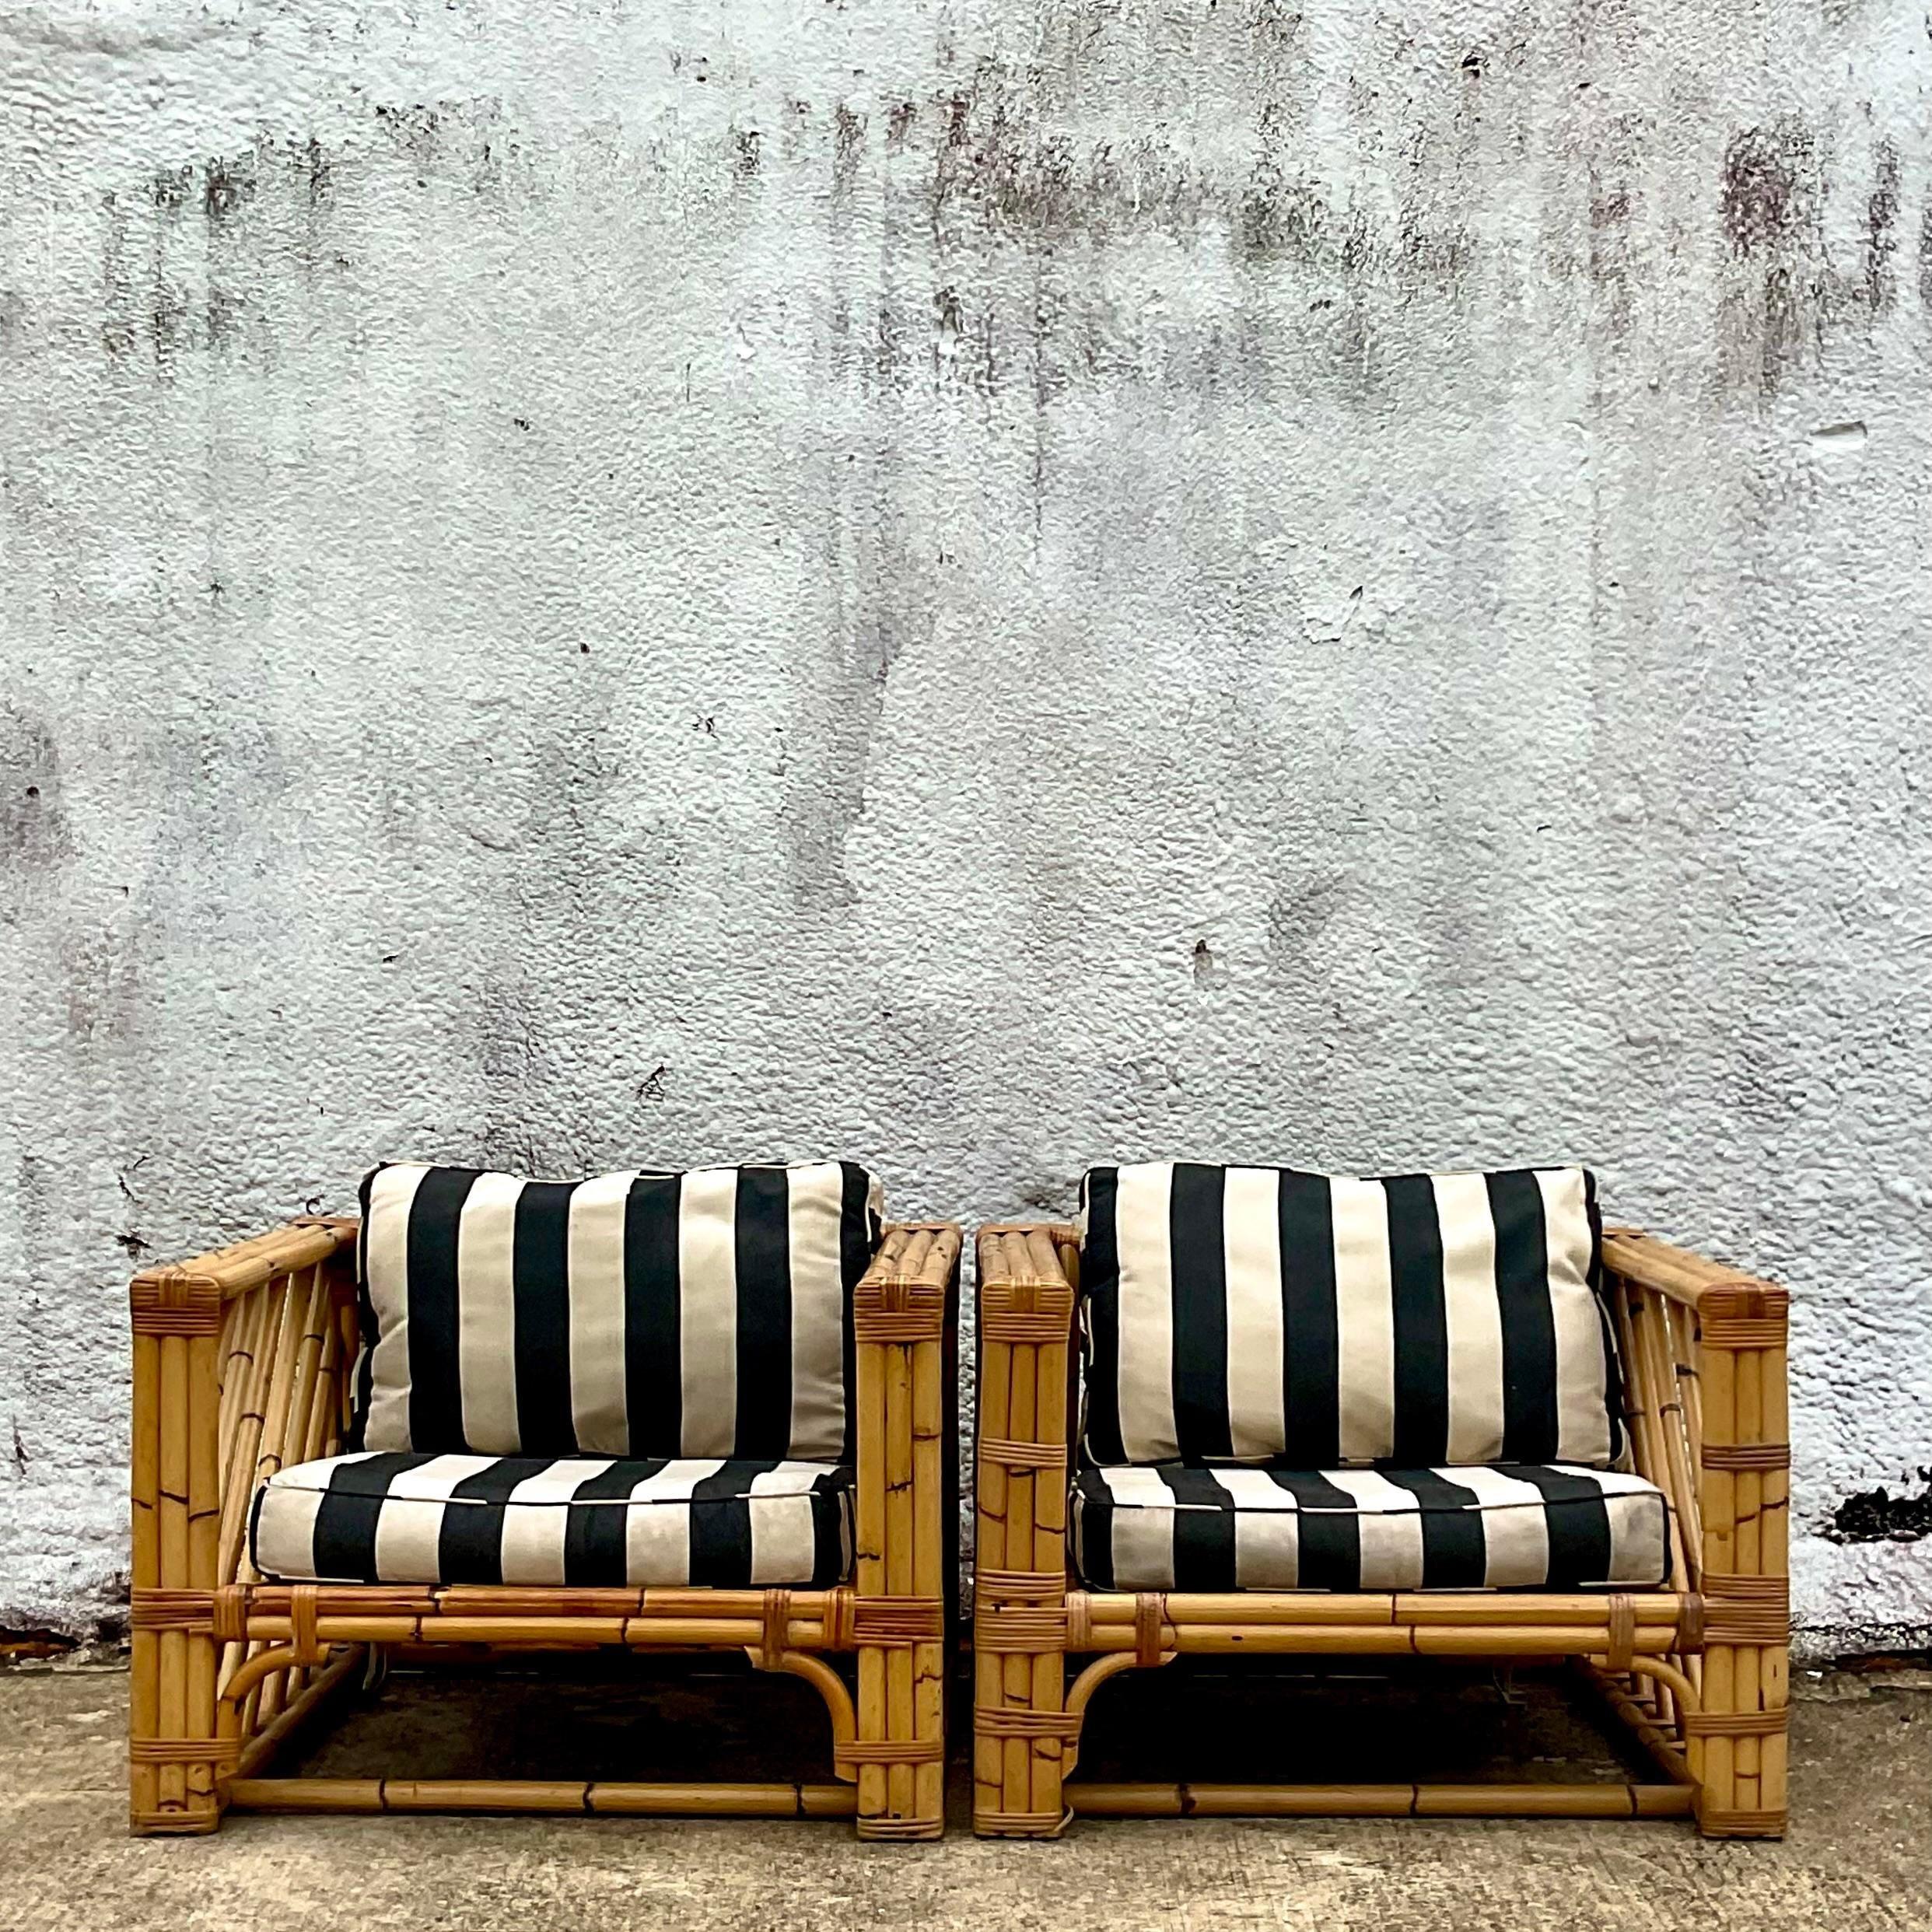 Philippine Vintage Coastal Chevron Bamboo Lounge Chairs - a Pair For Sale